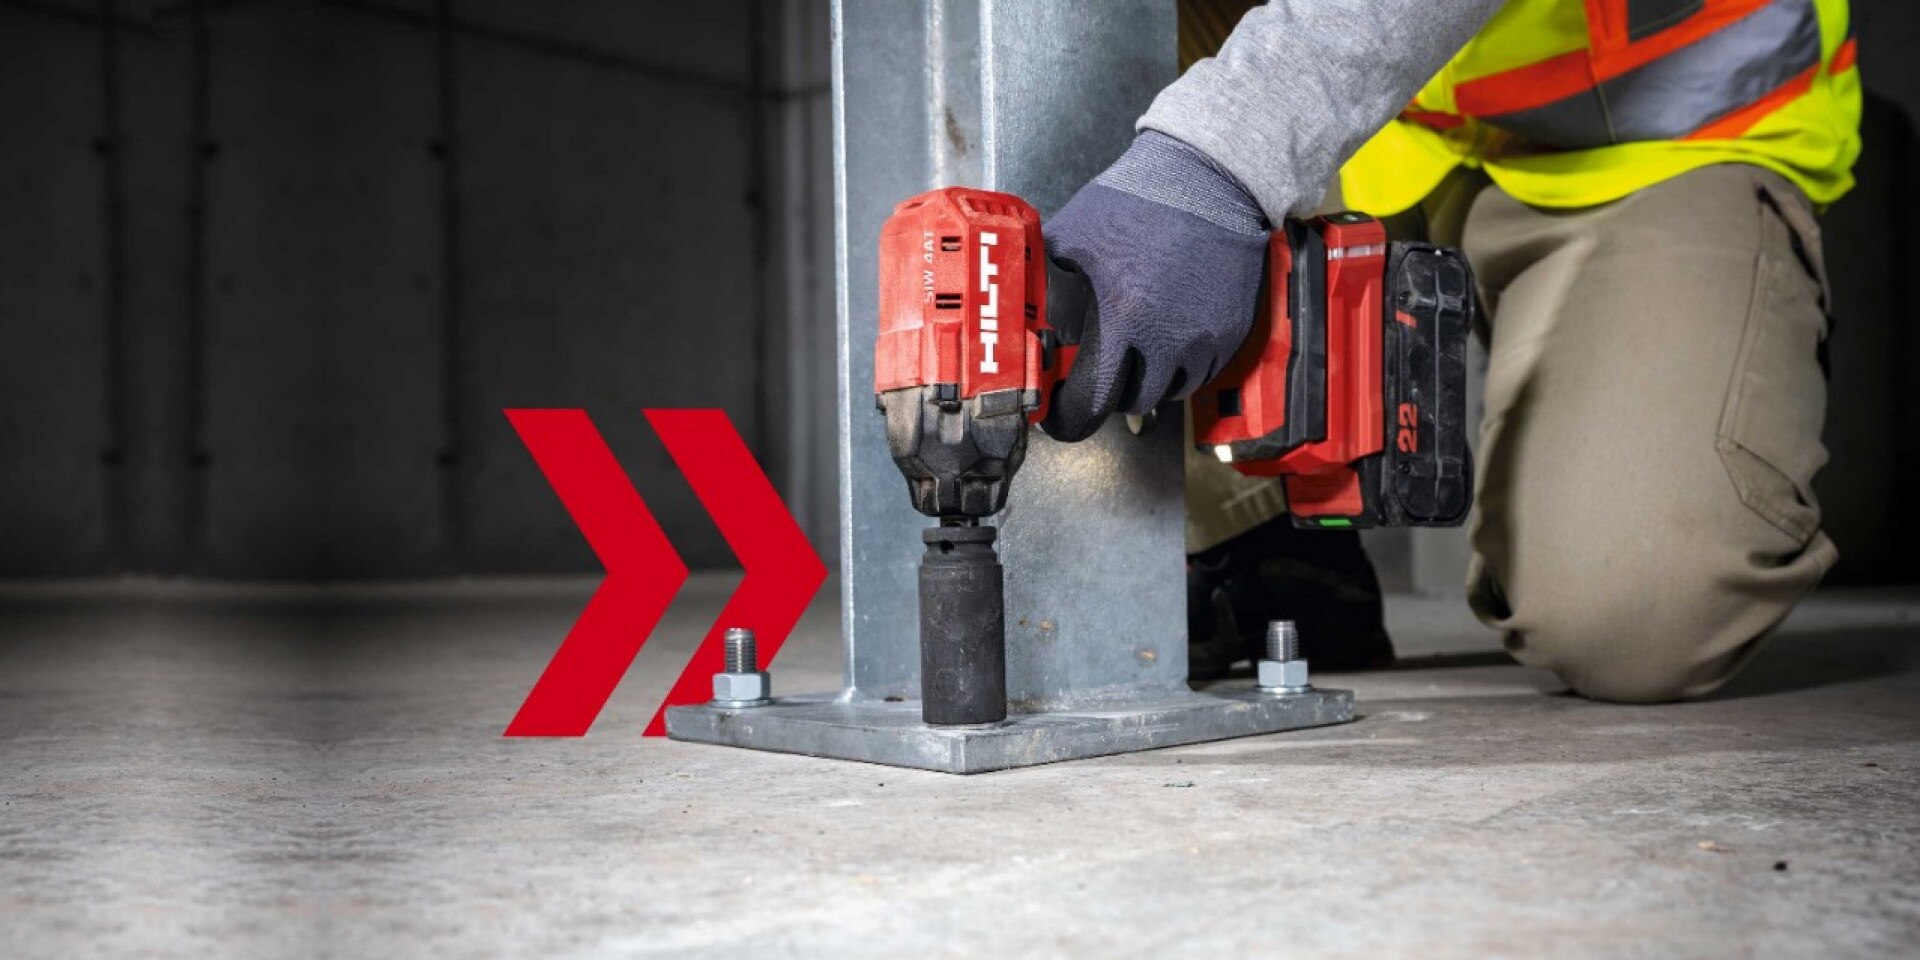 Whats New at Hilti Check out our latest products and innovations